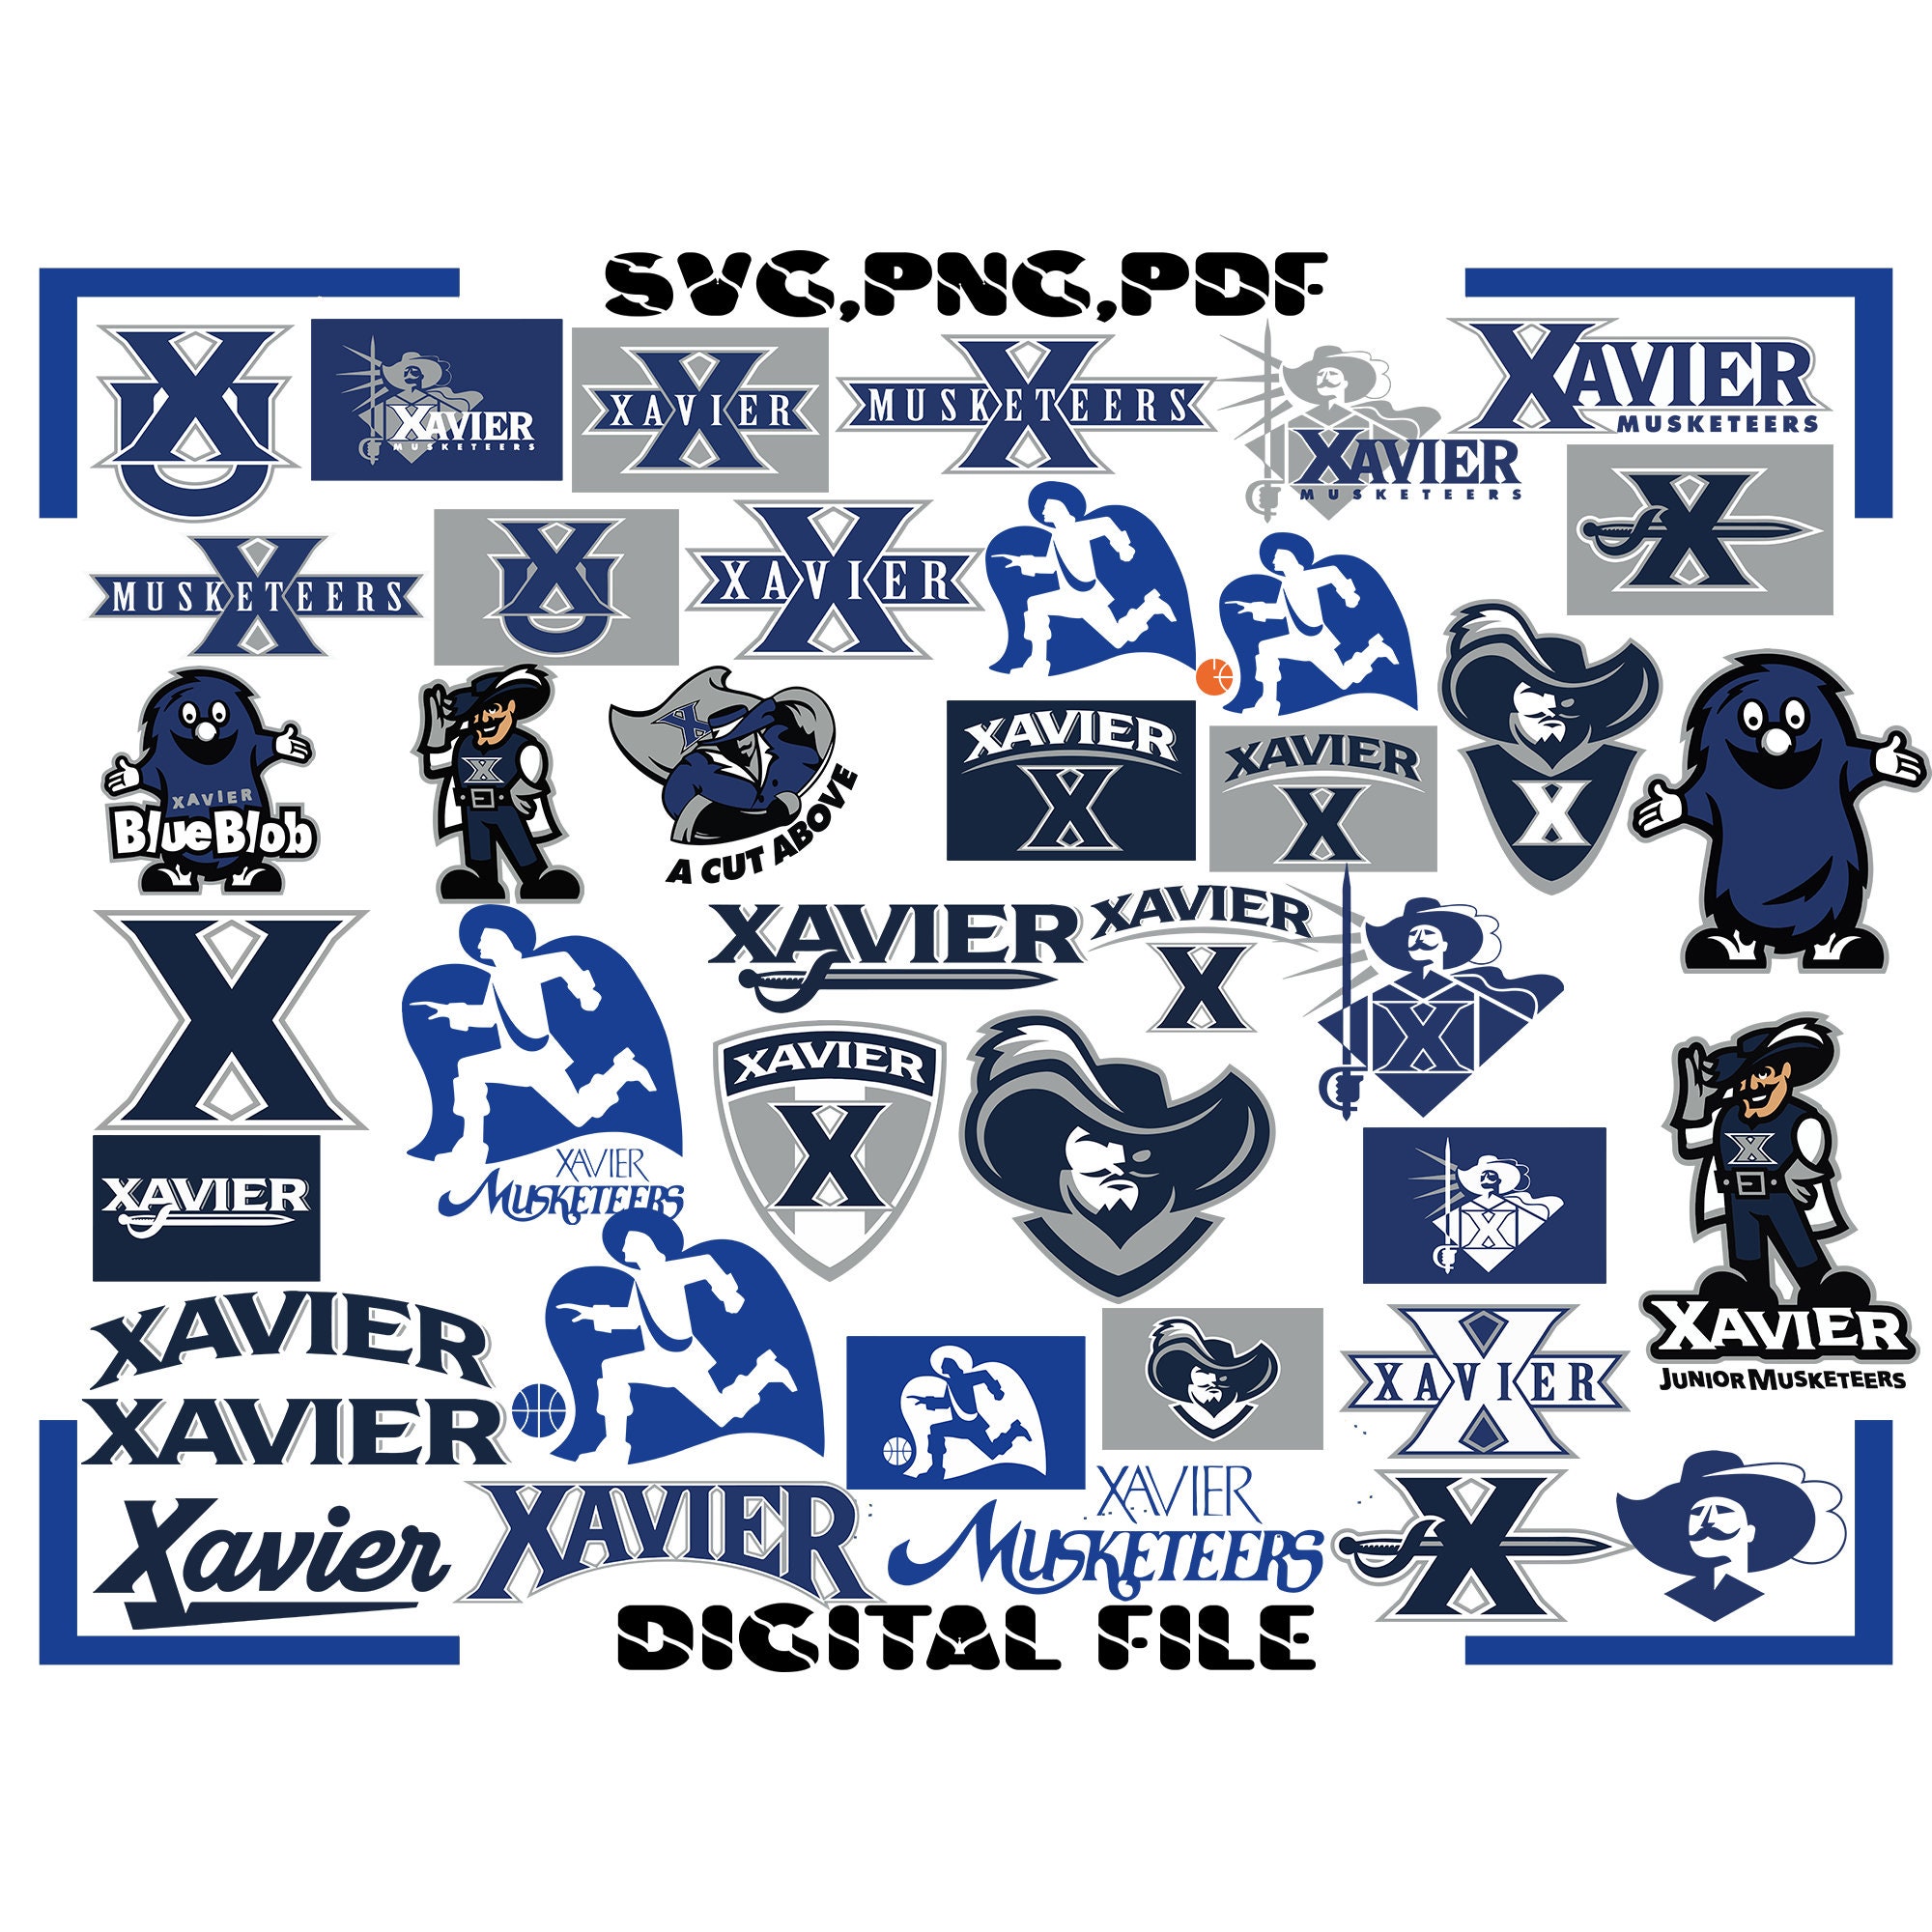 Xavier Musketeers NCAA Fan Apparel & Souvenirs for sale